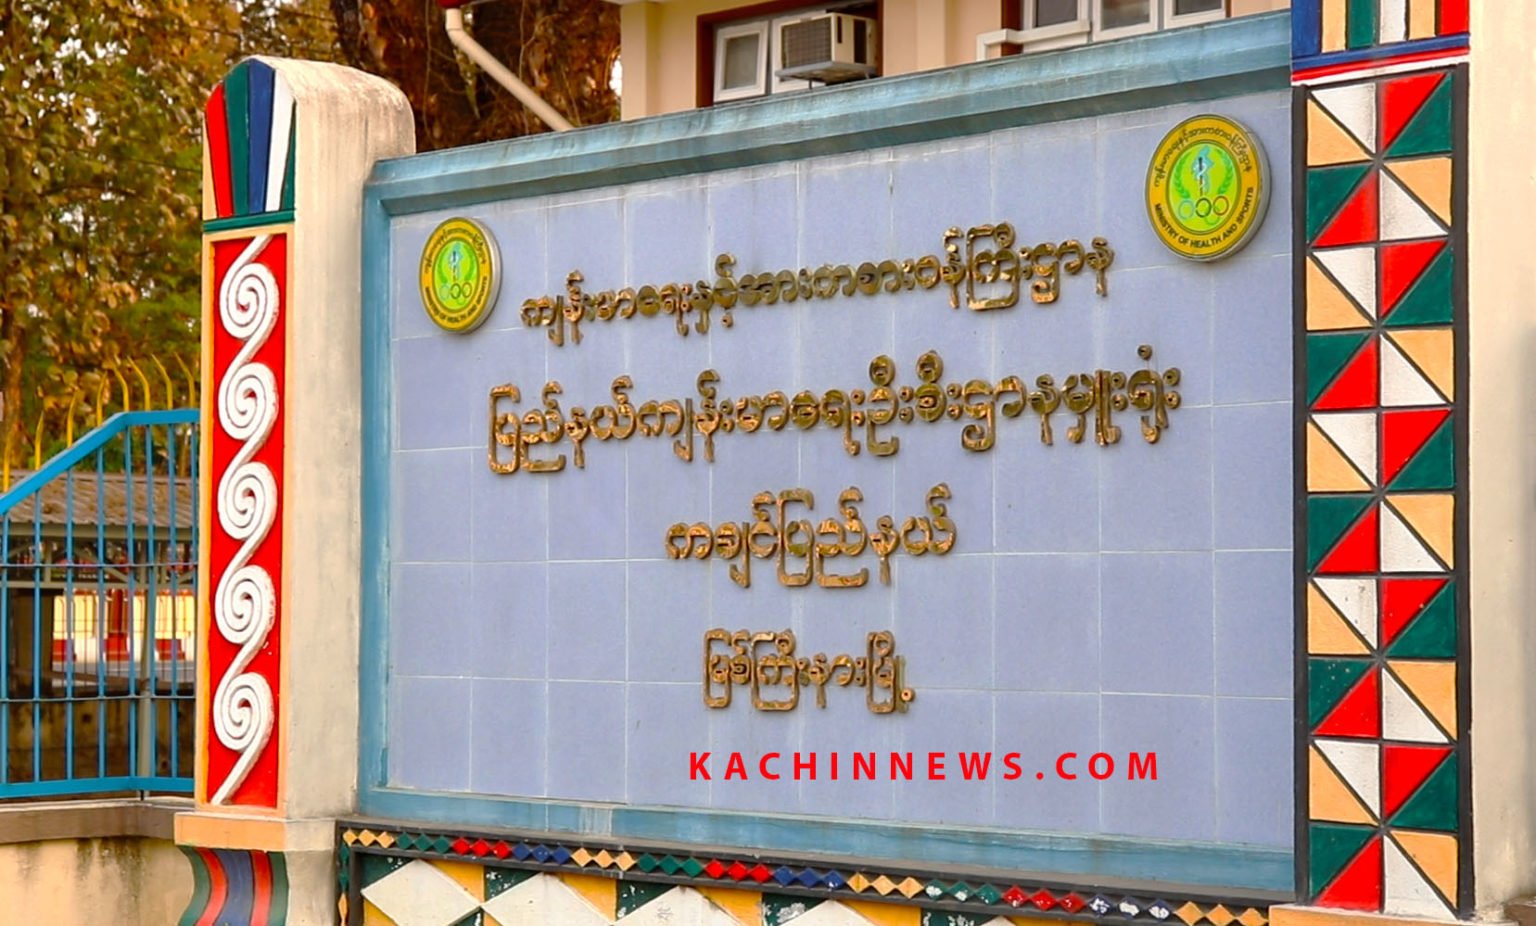 Over 1,000 COVID-19 Cases in Kachin State